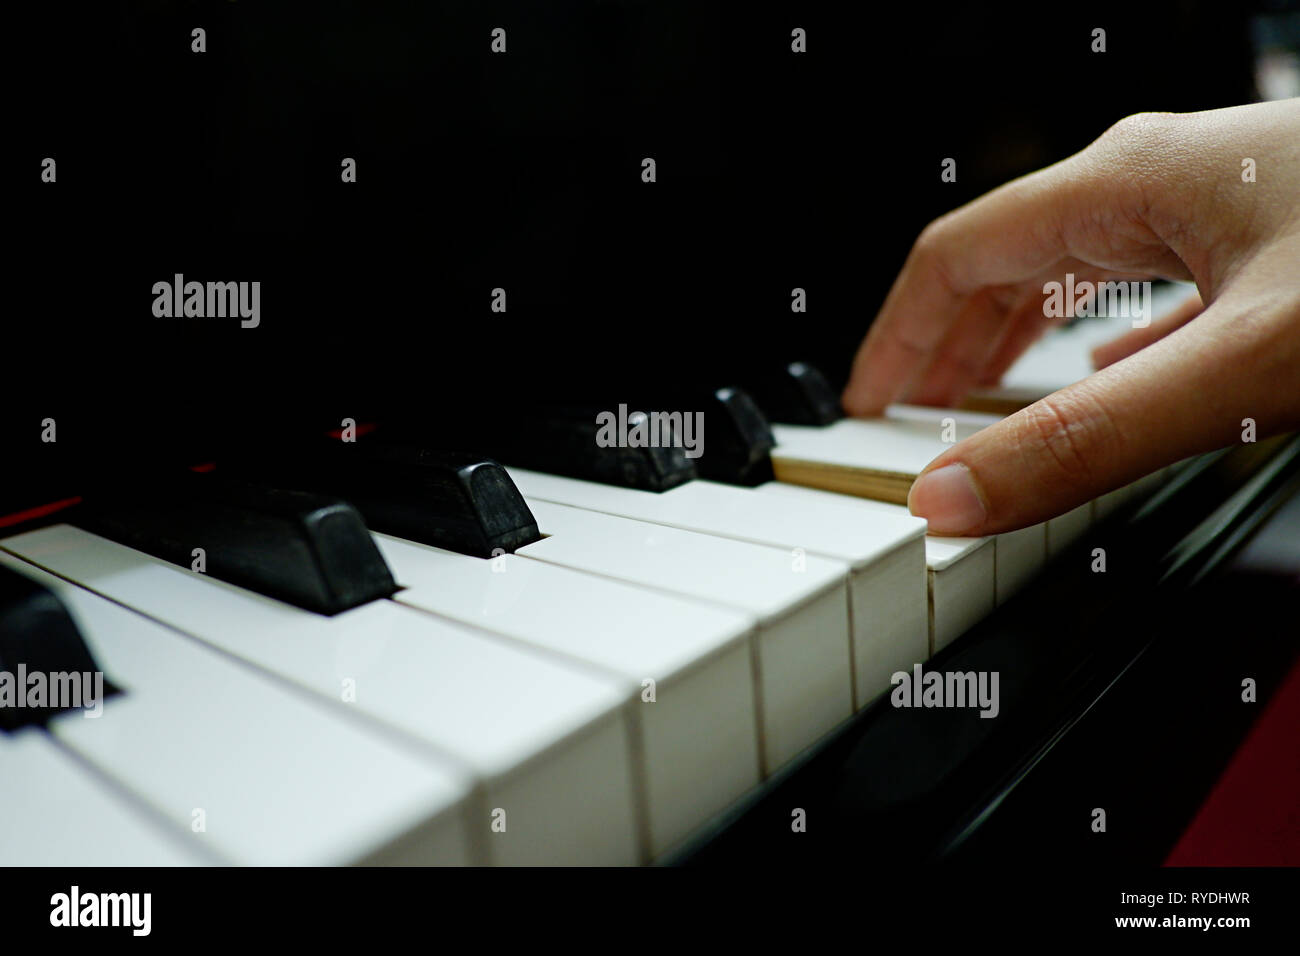 close-up female hand playing grand piano Stock Photo